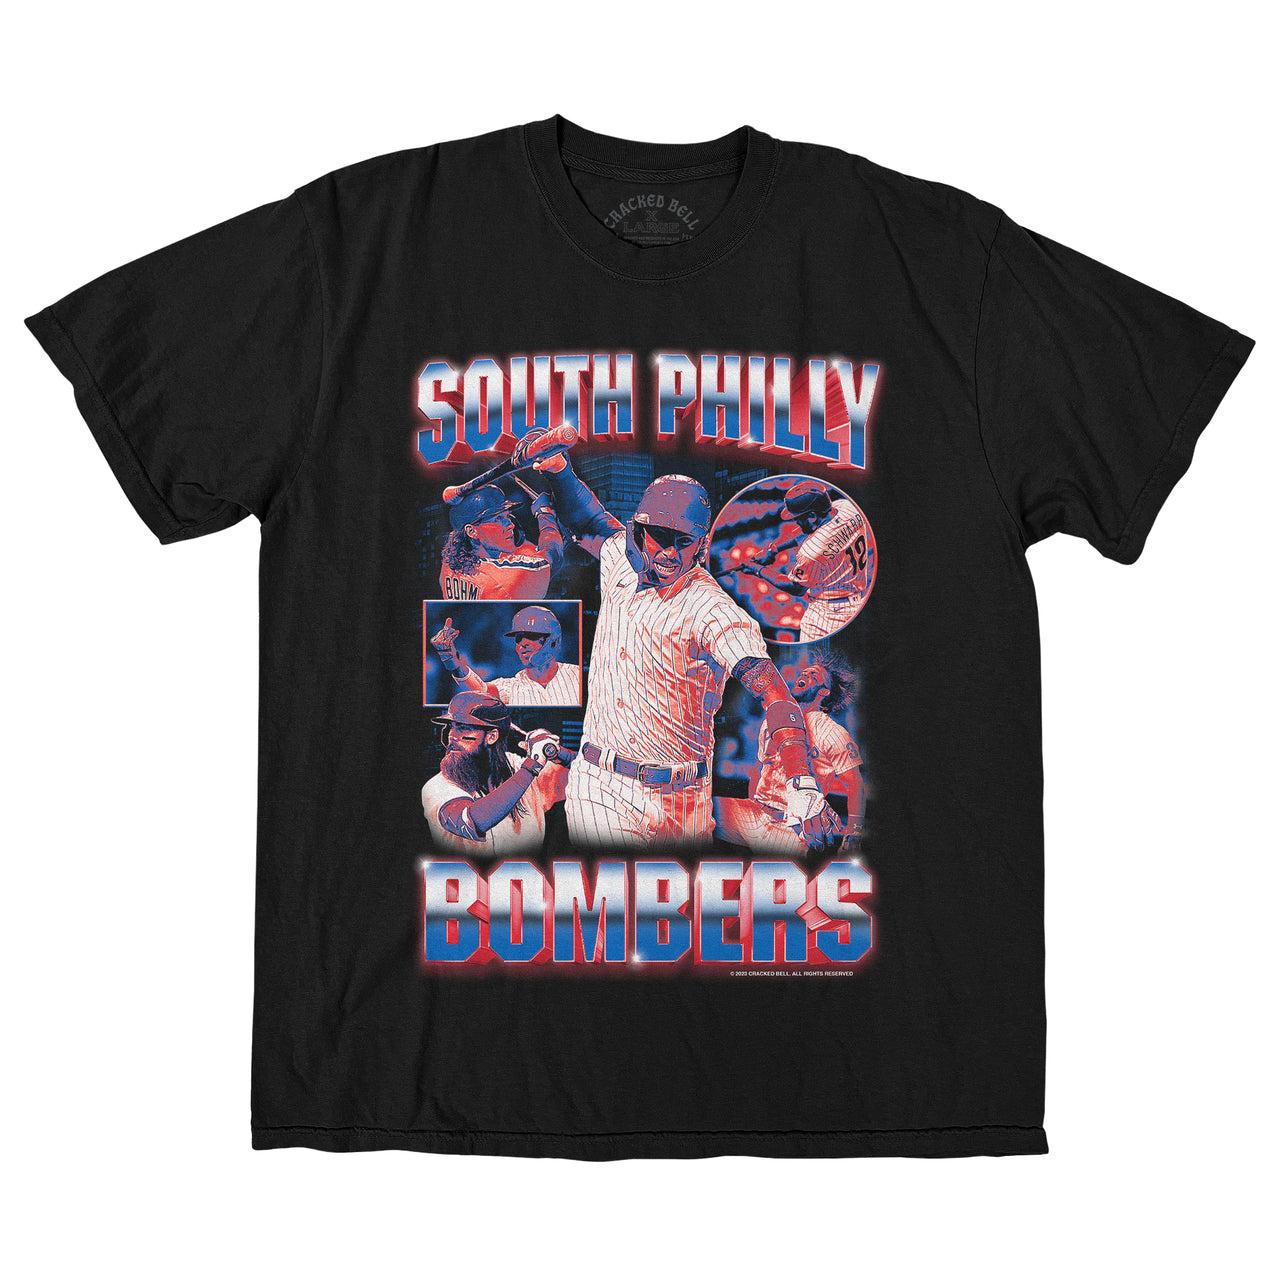 "South Philly Bombers" Shirt